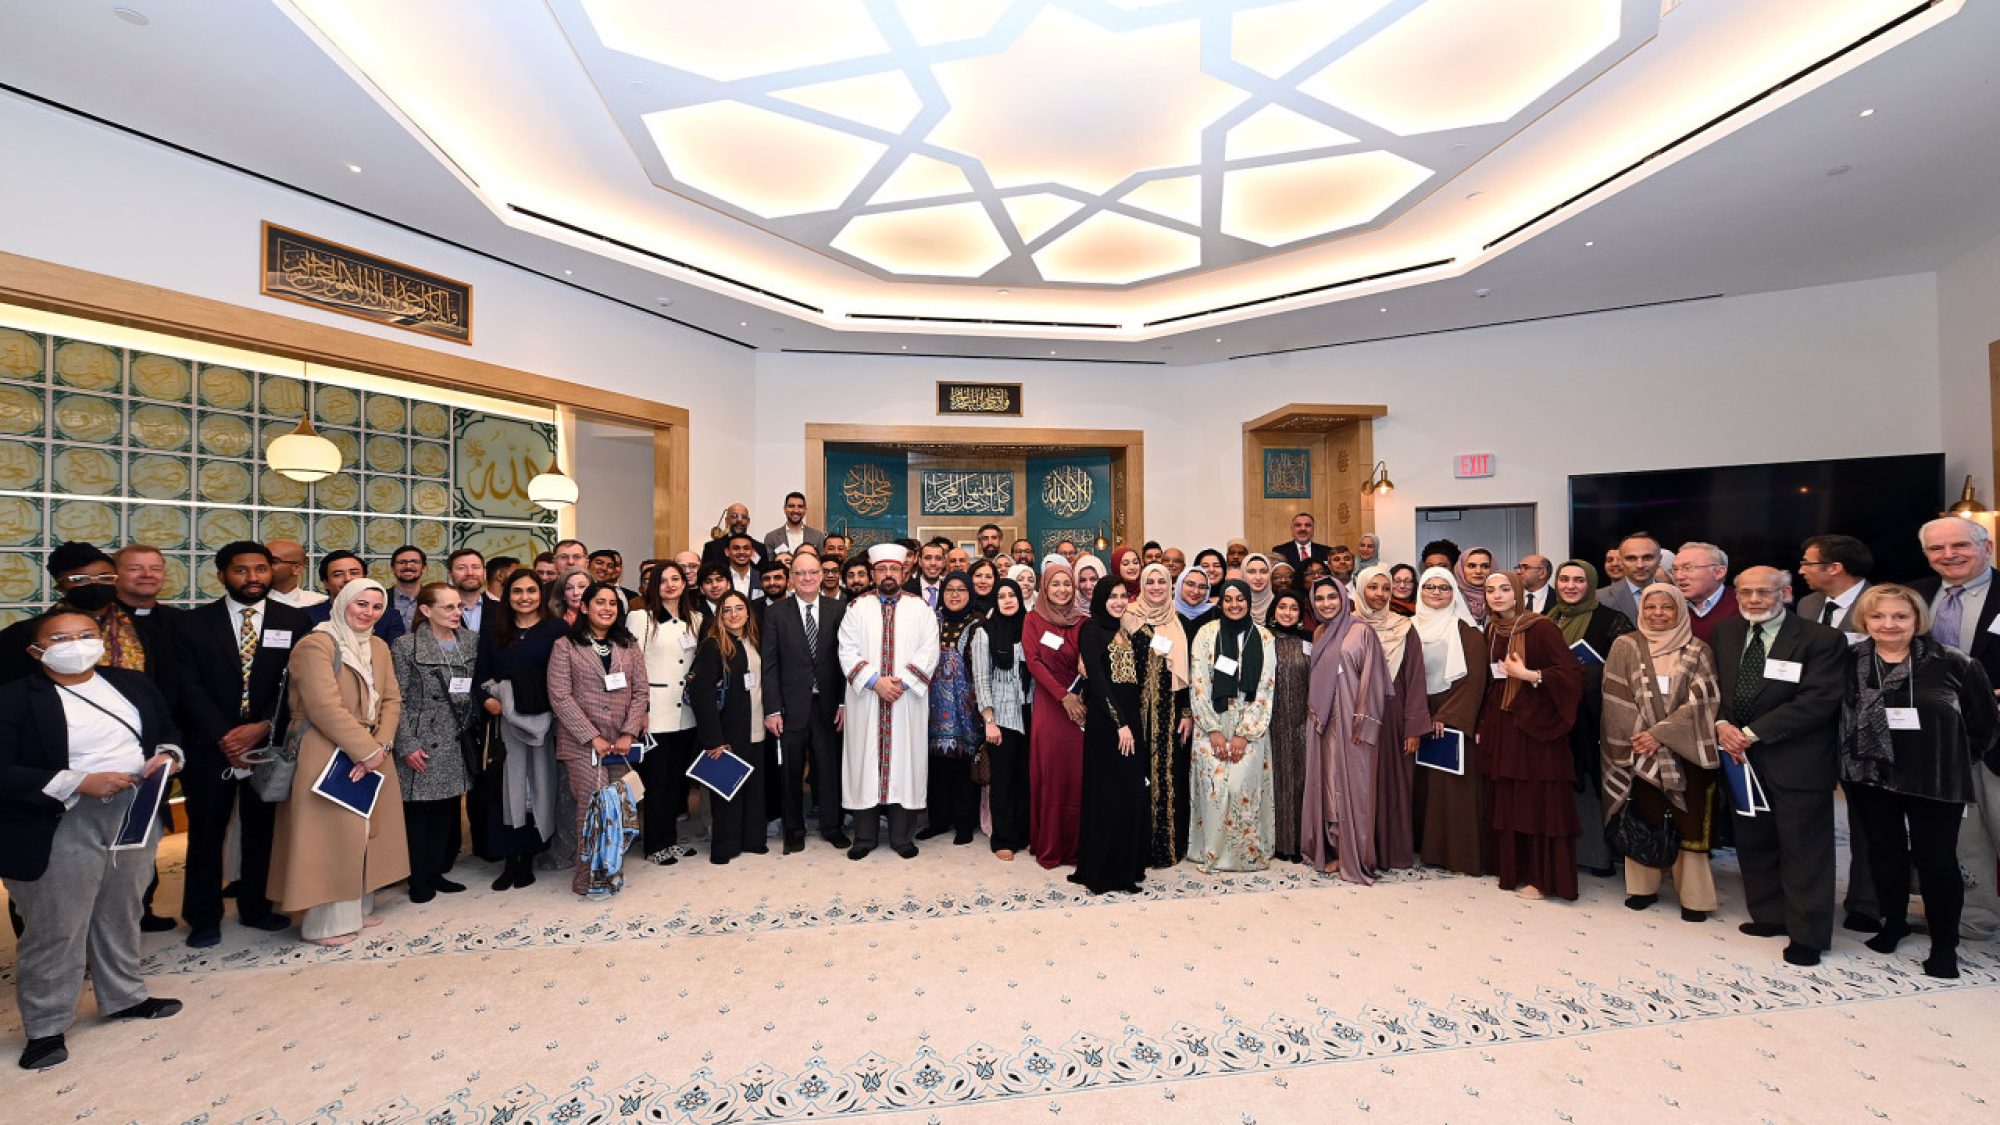 Students, alumni, Georgetown community members, Muslim leaders, a representative of the DC Council and diplomats from Turkey, Qatar and Indonesia pose for a photo at the March 18 event.